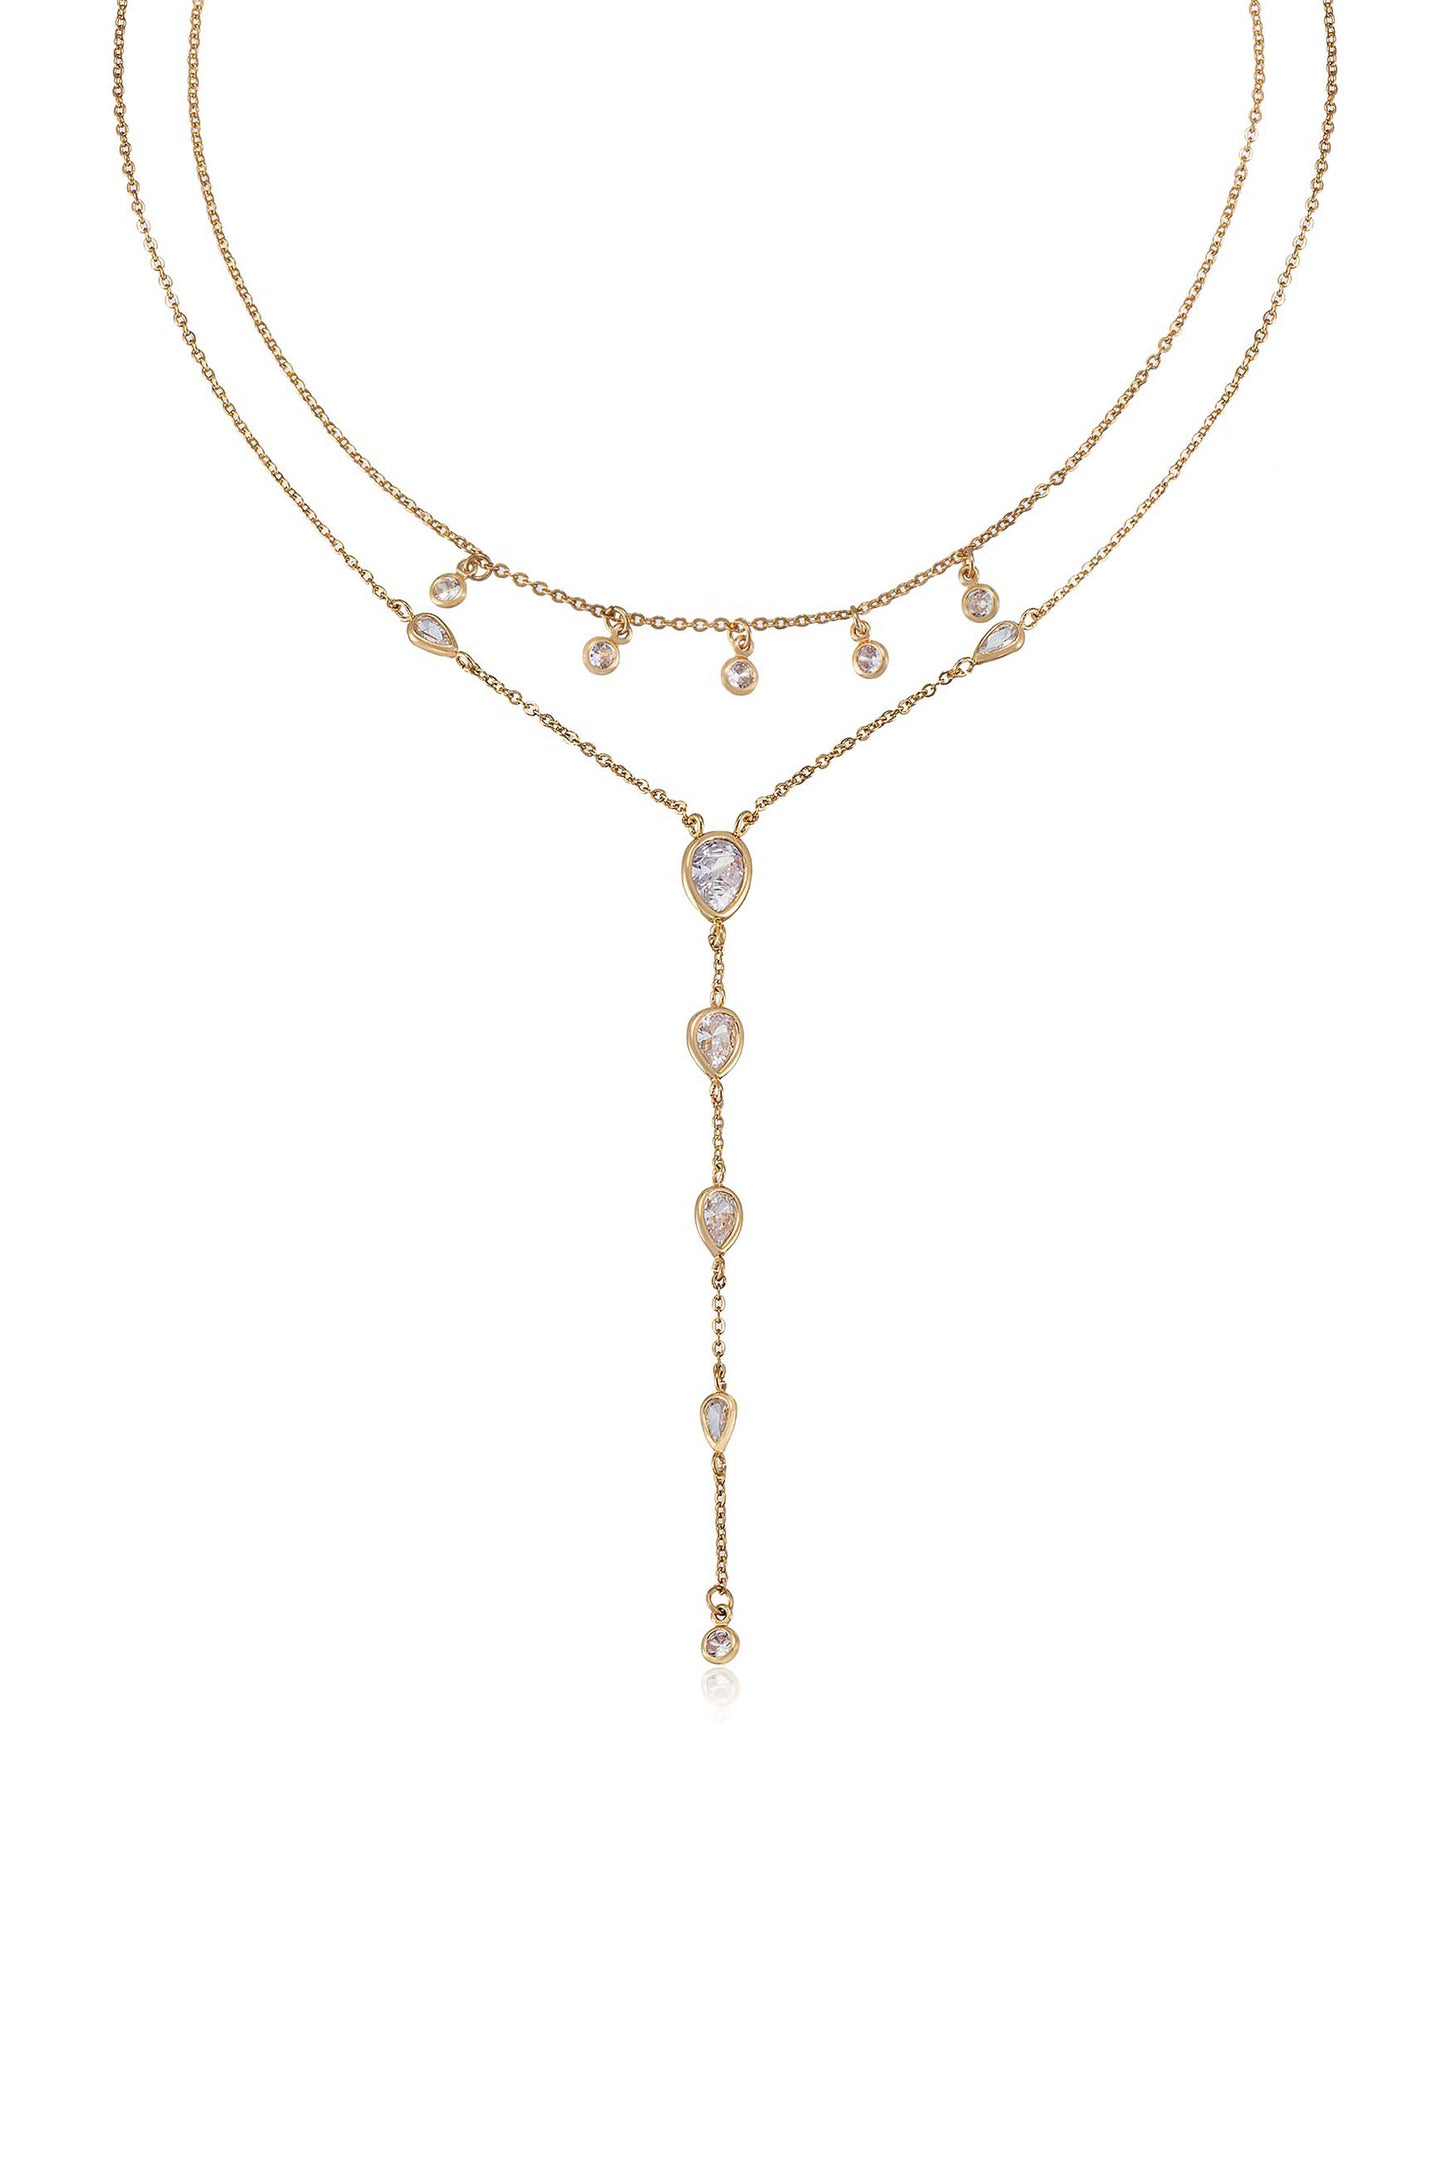 Draped in Bezel Crystal 18k Gold Plated Lariat Necklace Set